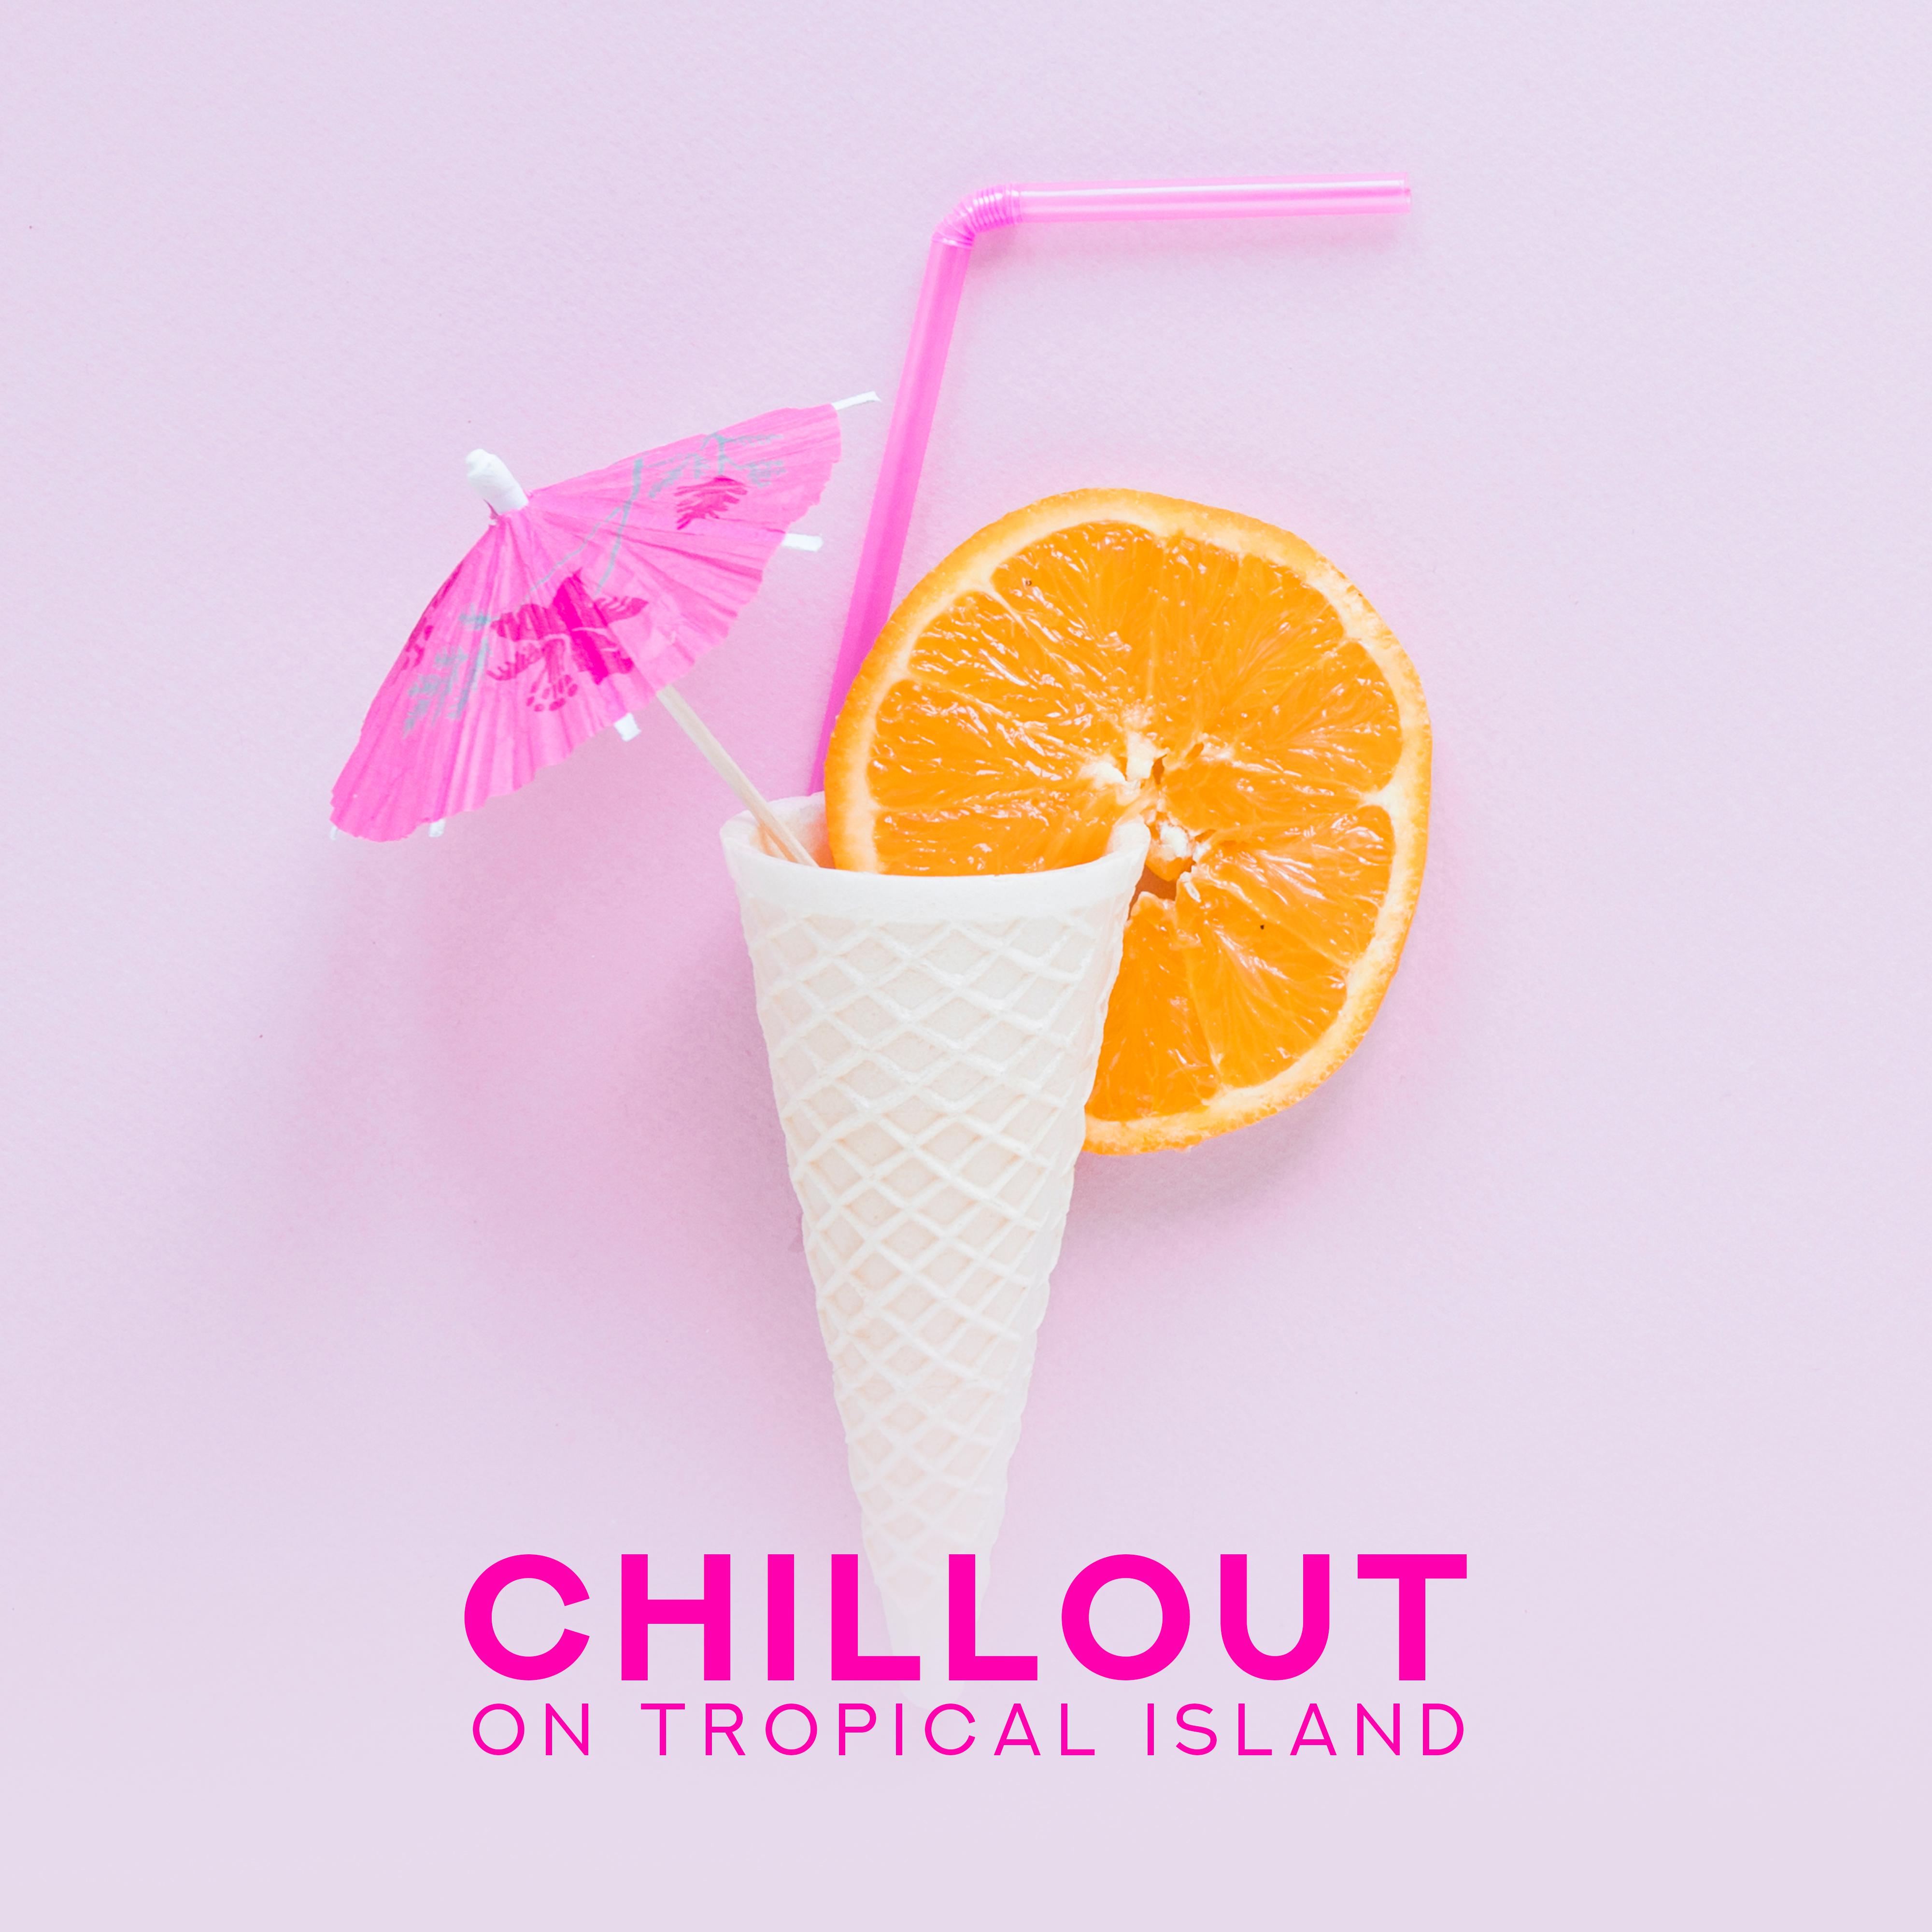 Chillout on Tropical Island  15 Chill Out Music Songs for  Dance, Beach Party, Relax Deep on the Beach